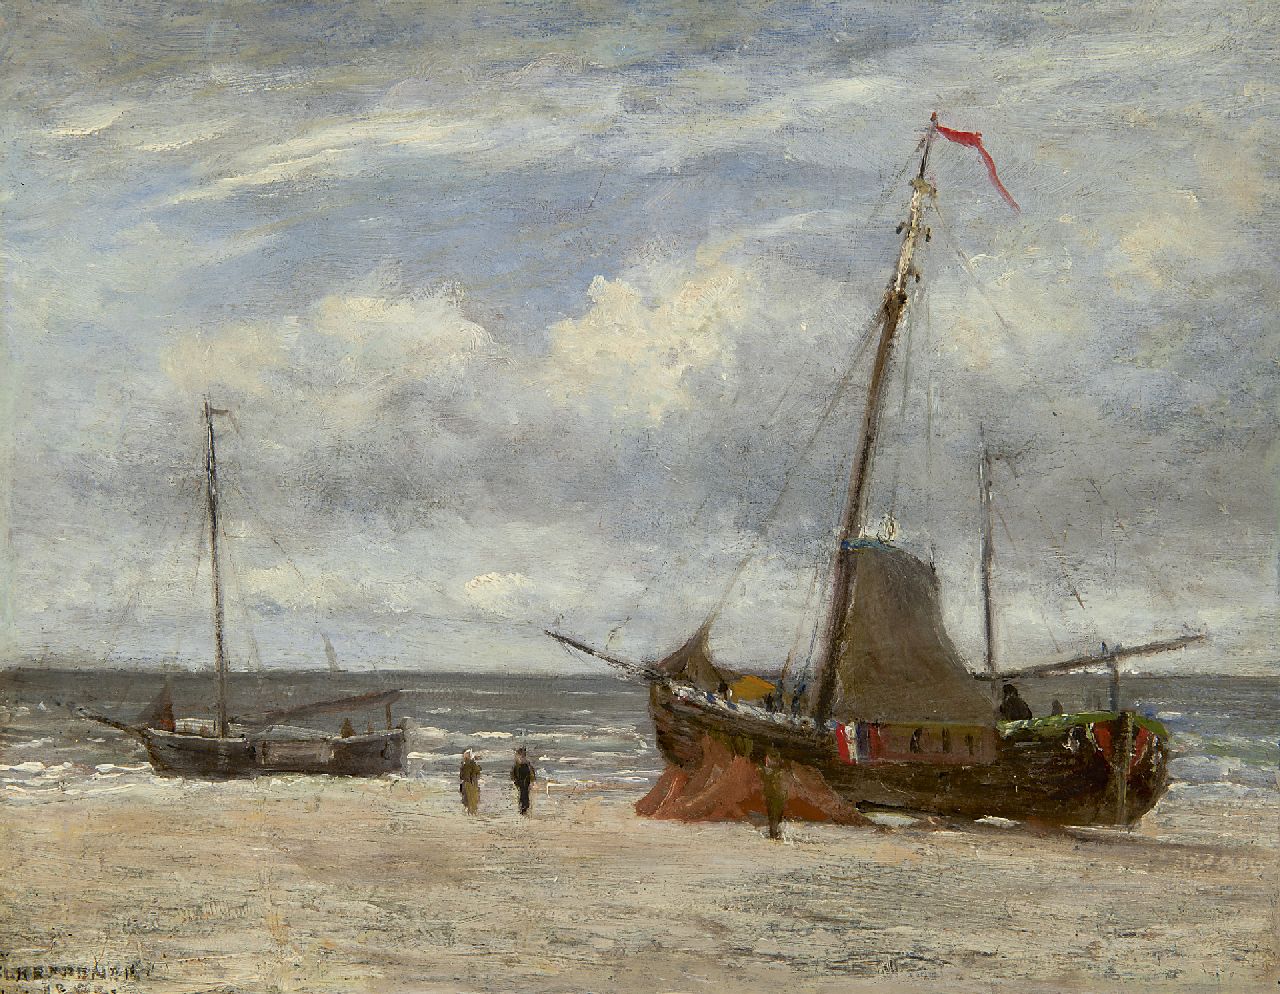 Heppener J.J.  | Johannes Jacobus 'Jan' Heppener, Fishing boats on the beach, oil on panel 23.5 x 30.2 cm, signed l.l. and dated 18[?]